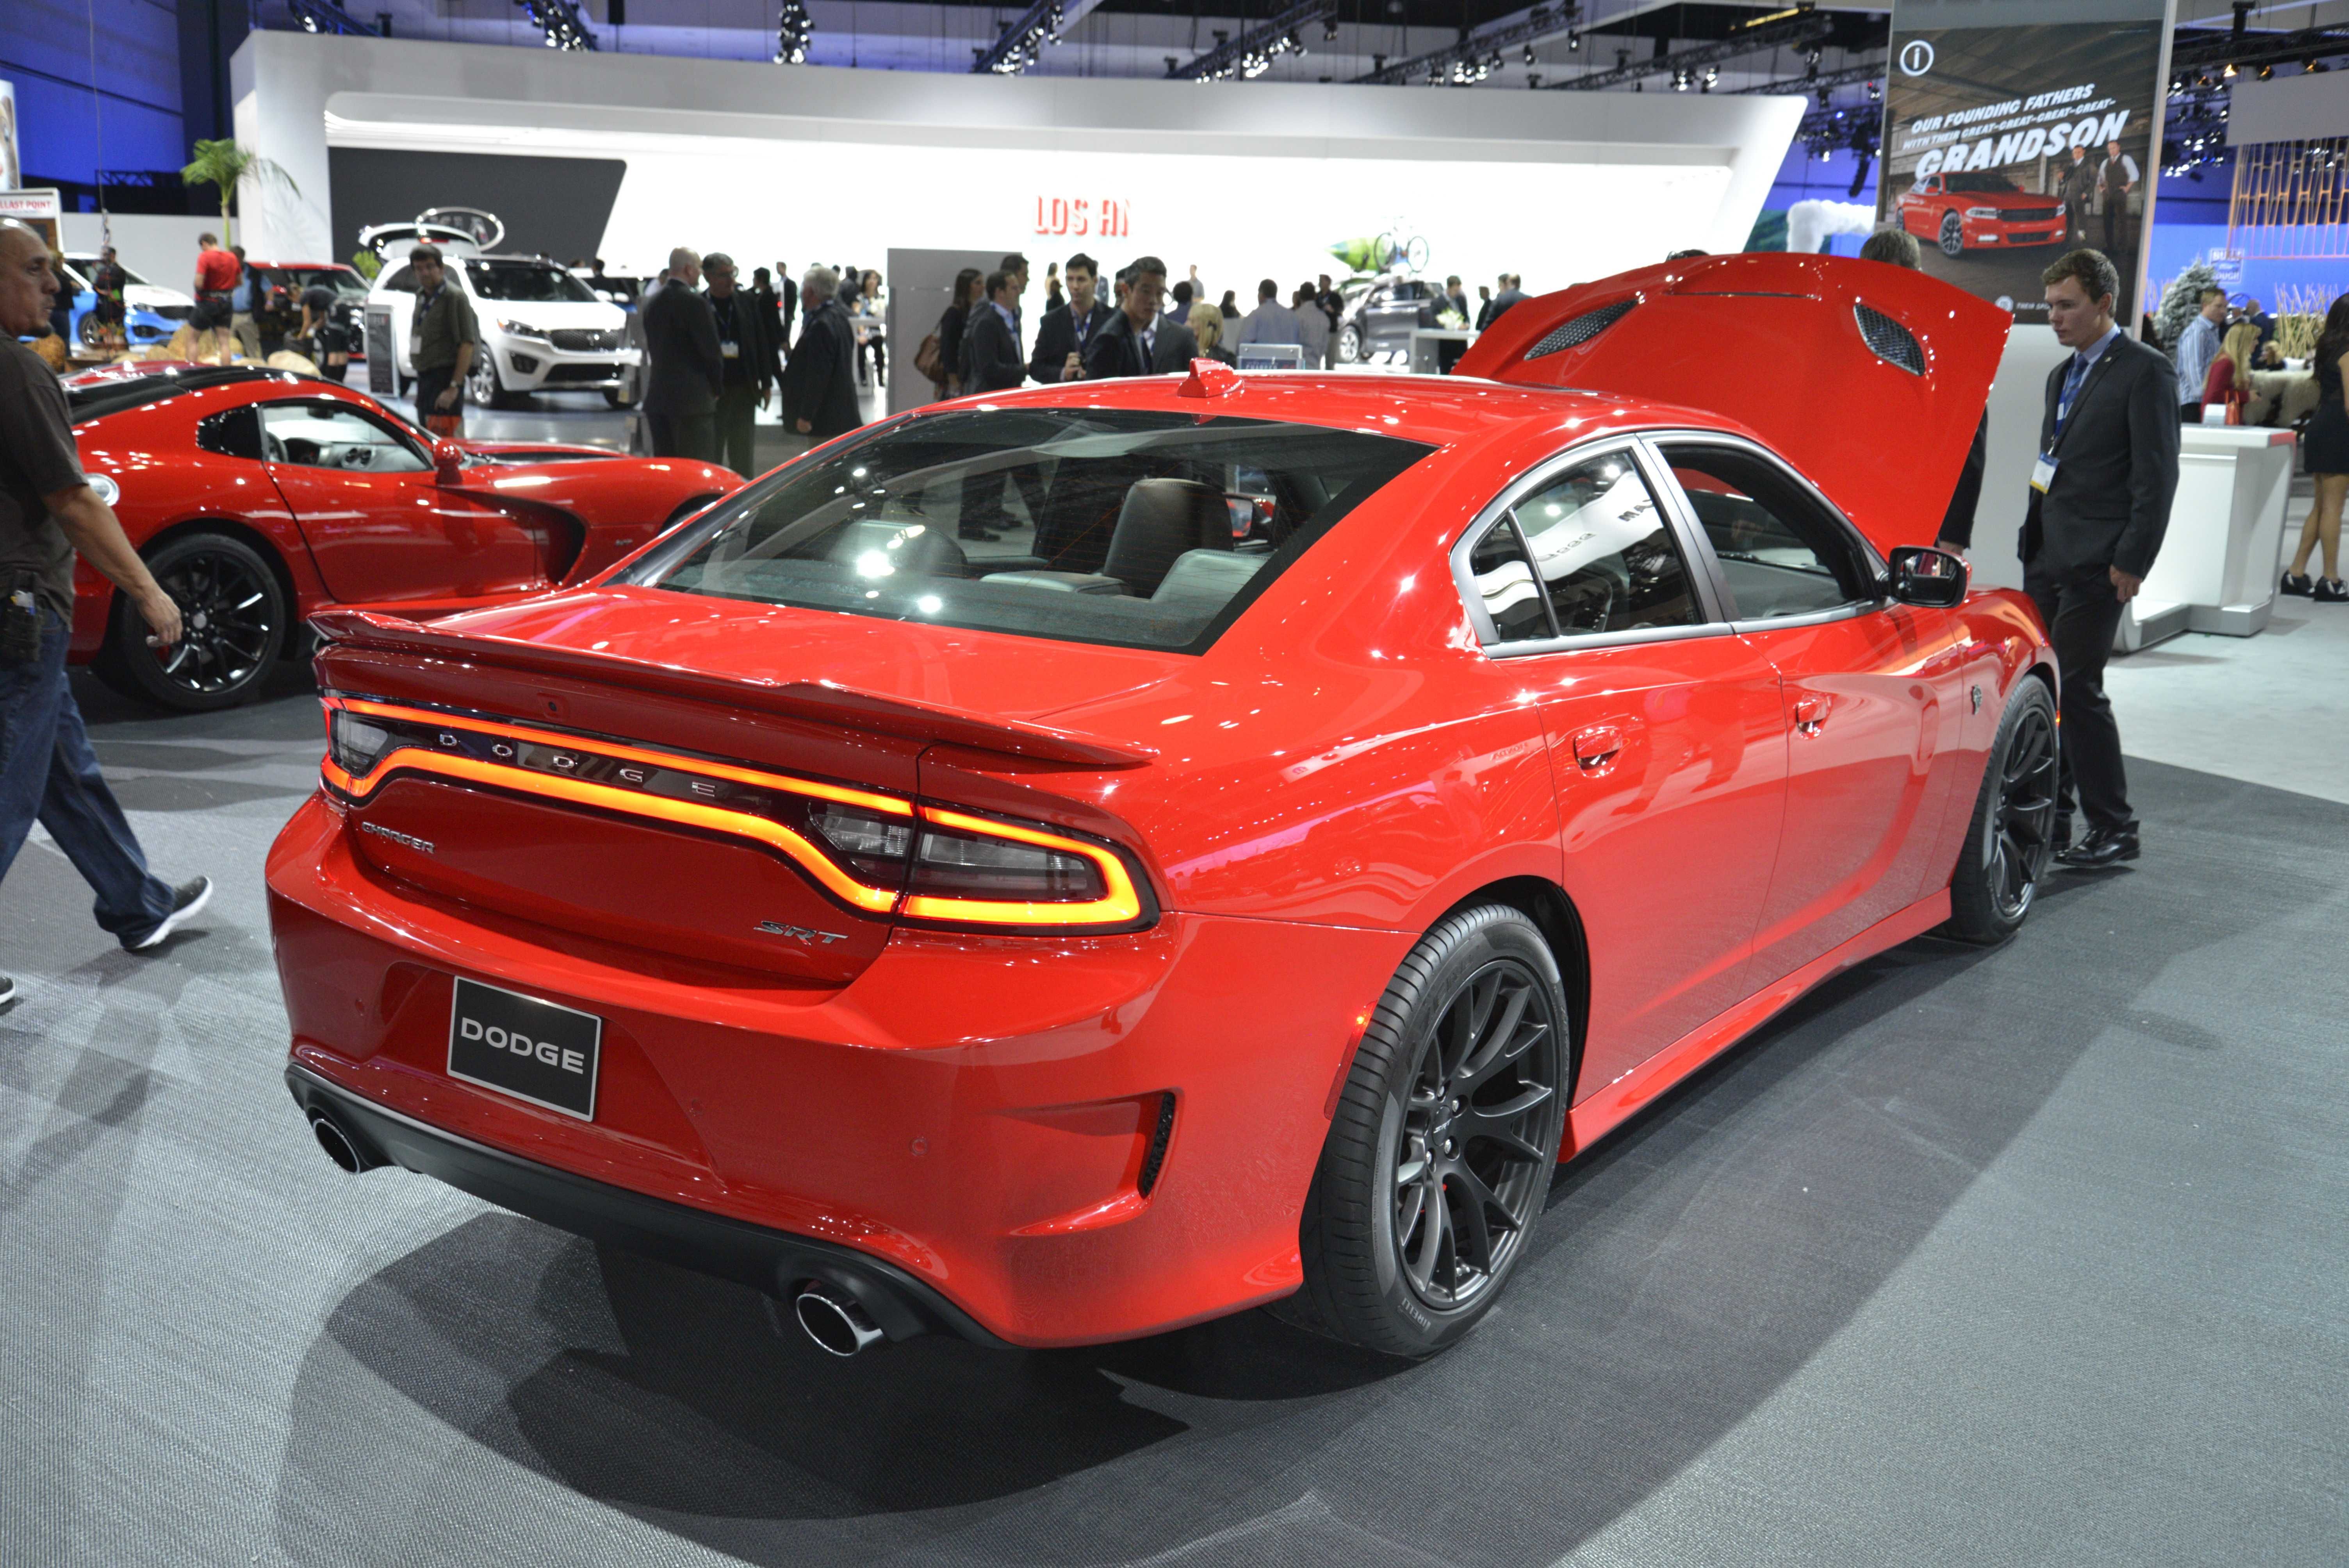 A Dodge Charger Hellcat on display.